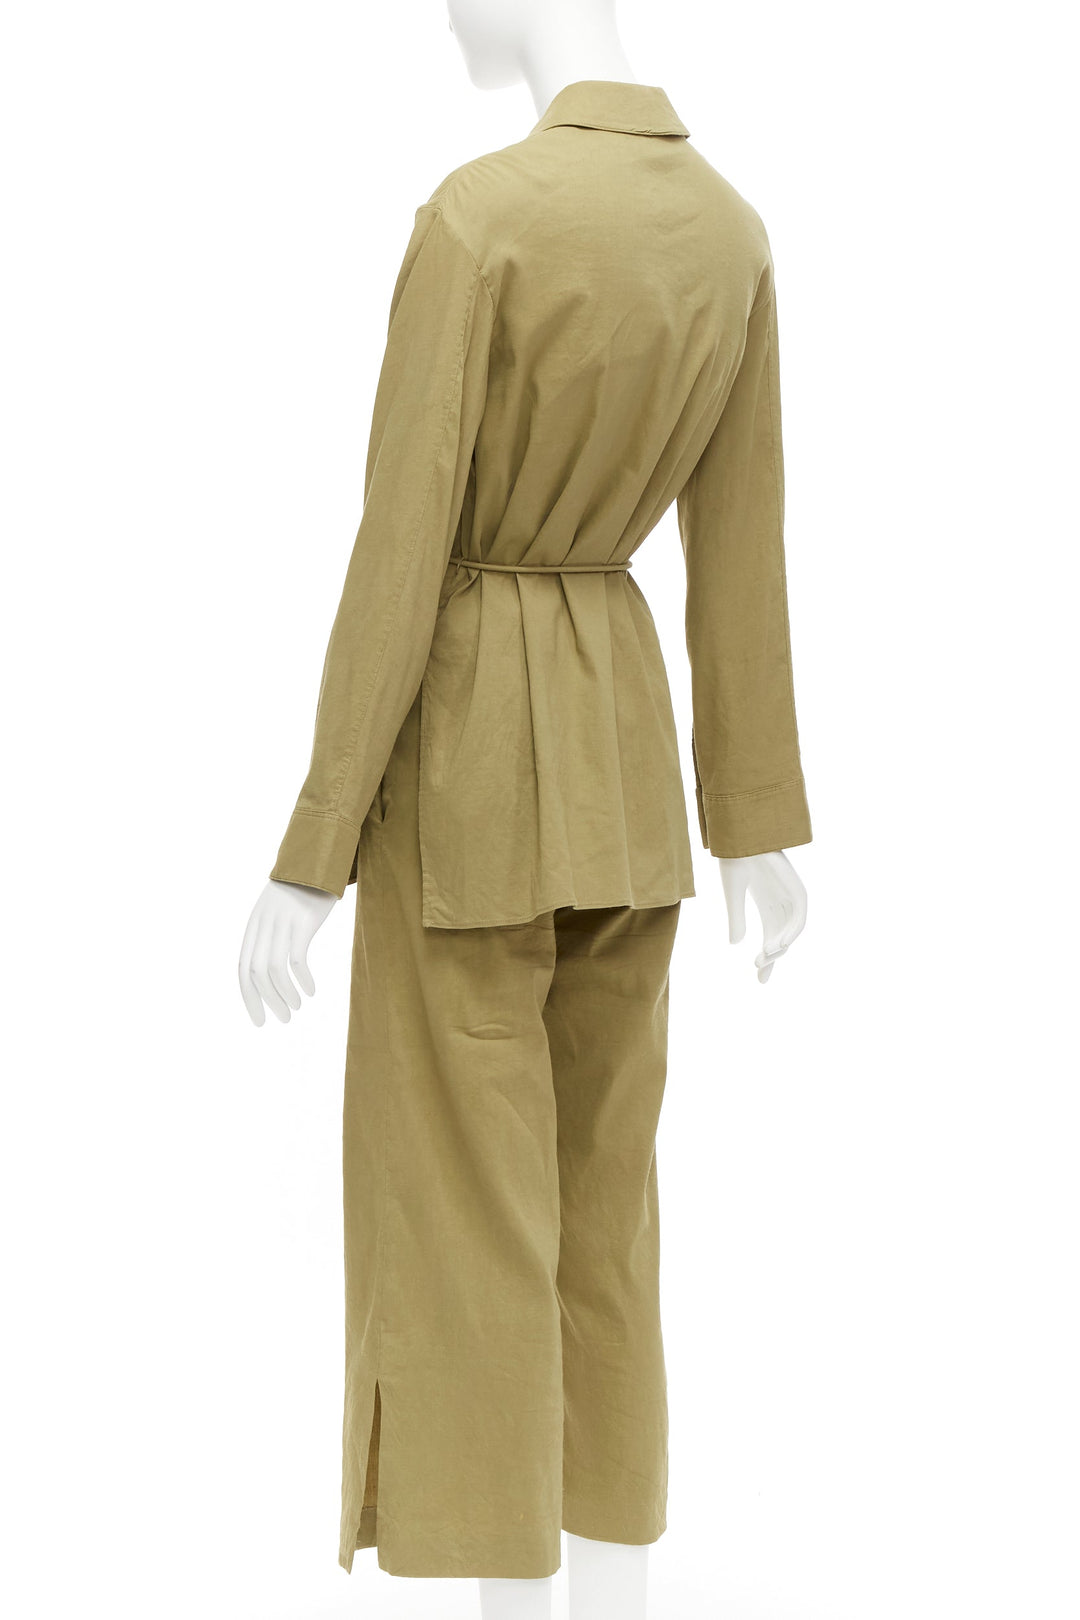 THEORY olive green linen blend tie belt relaxed jacket wide leg pants set US0 XS